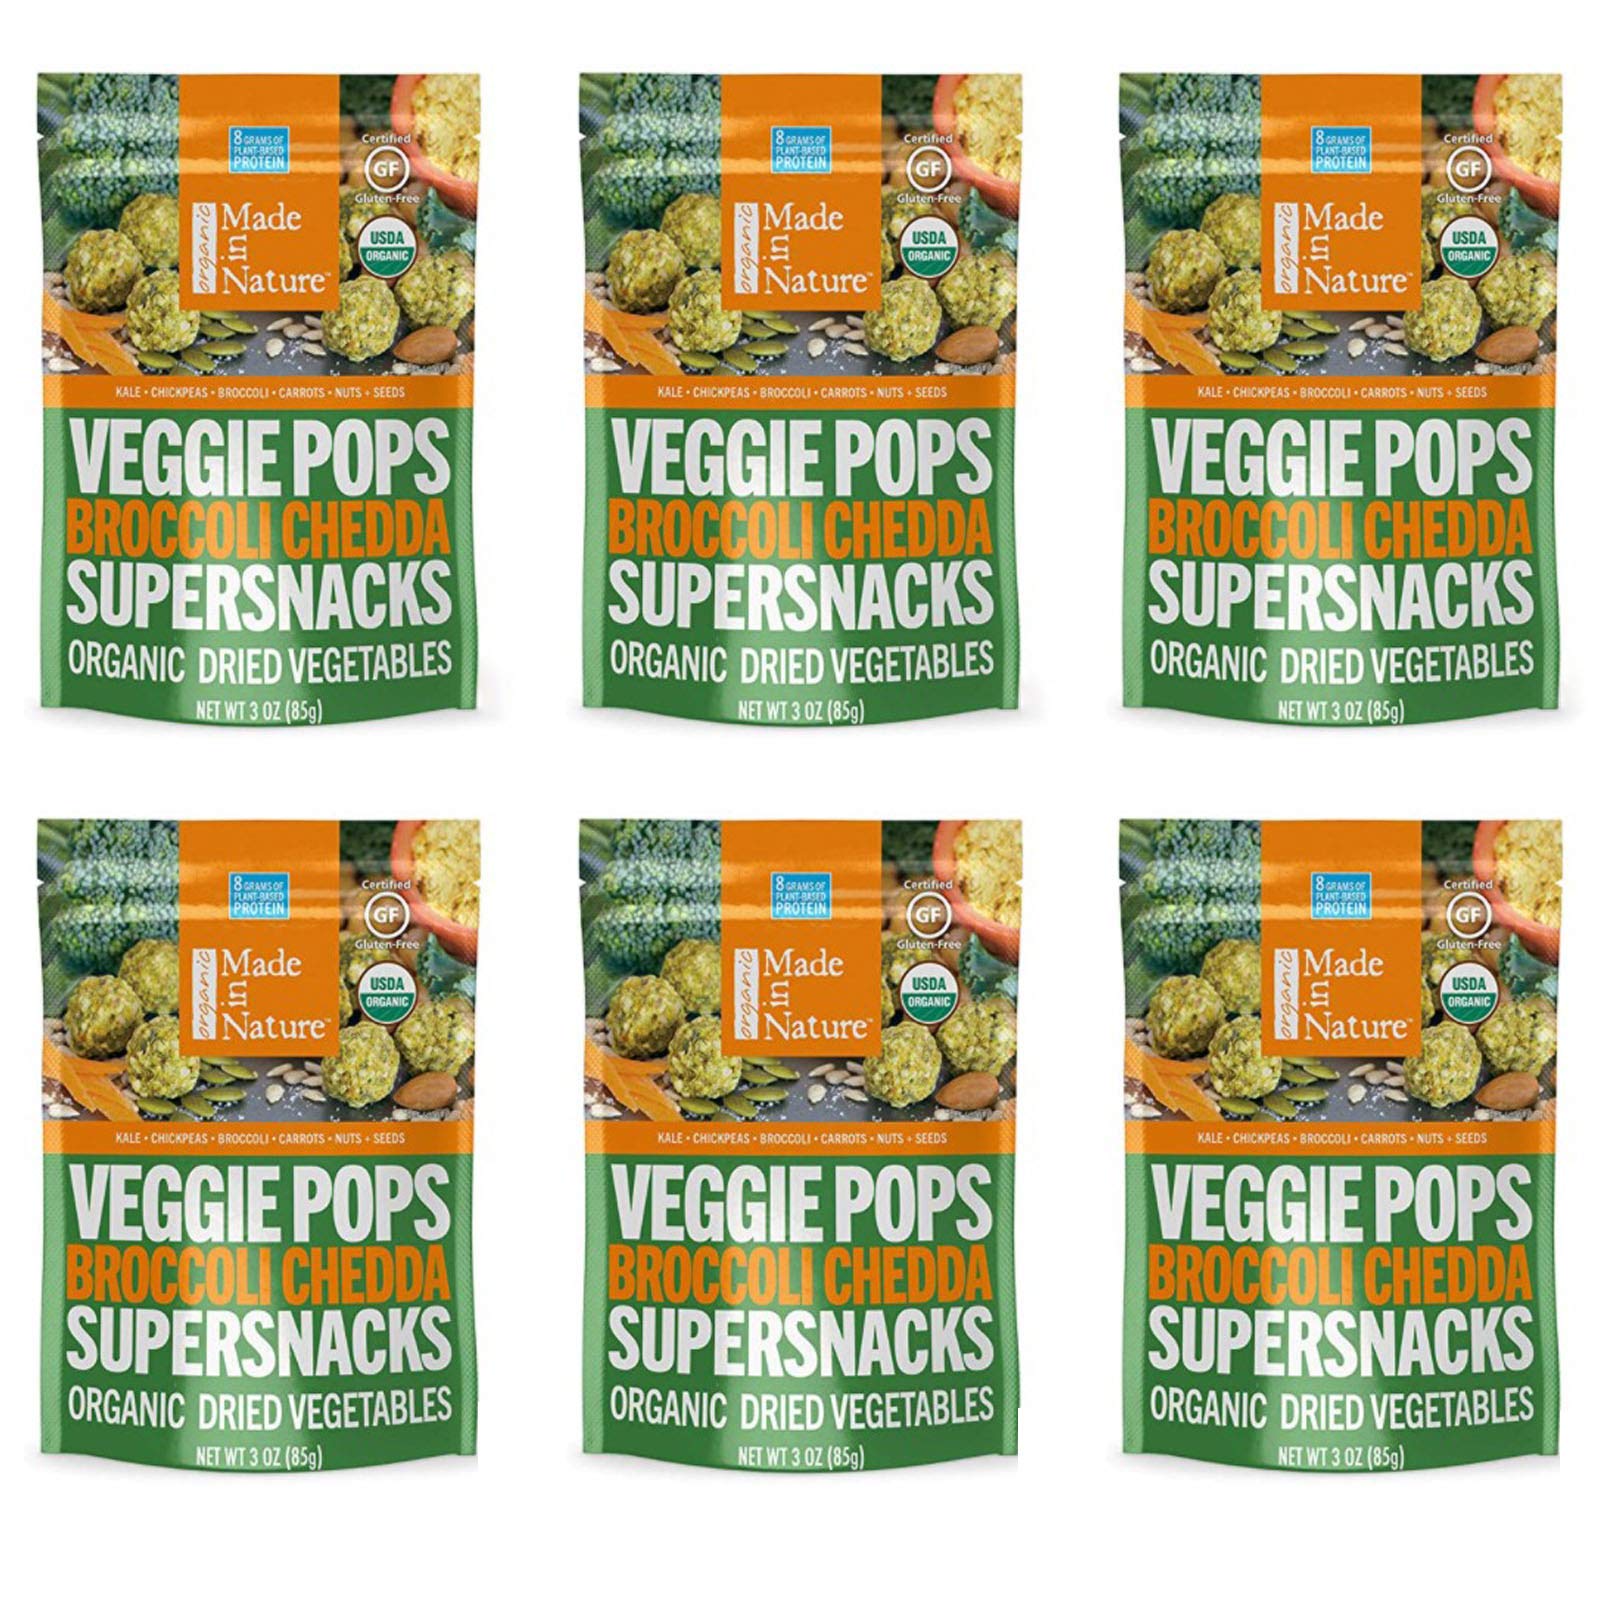 Book Cover Made in Nature | Organic Veggie Pops, Broccoli Cheddar | Vegan Baked Veggie Snacks | 3 Ounce Bags (6 Count) Broccoli Cheddar 3 Ounce (Pack of 6)